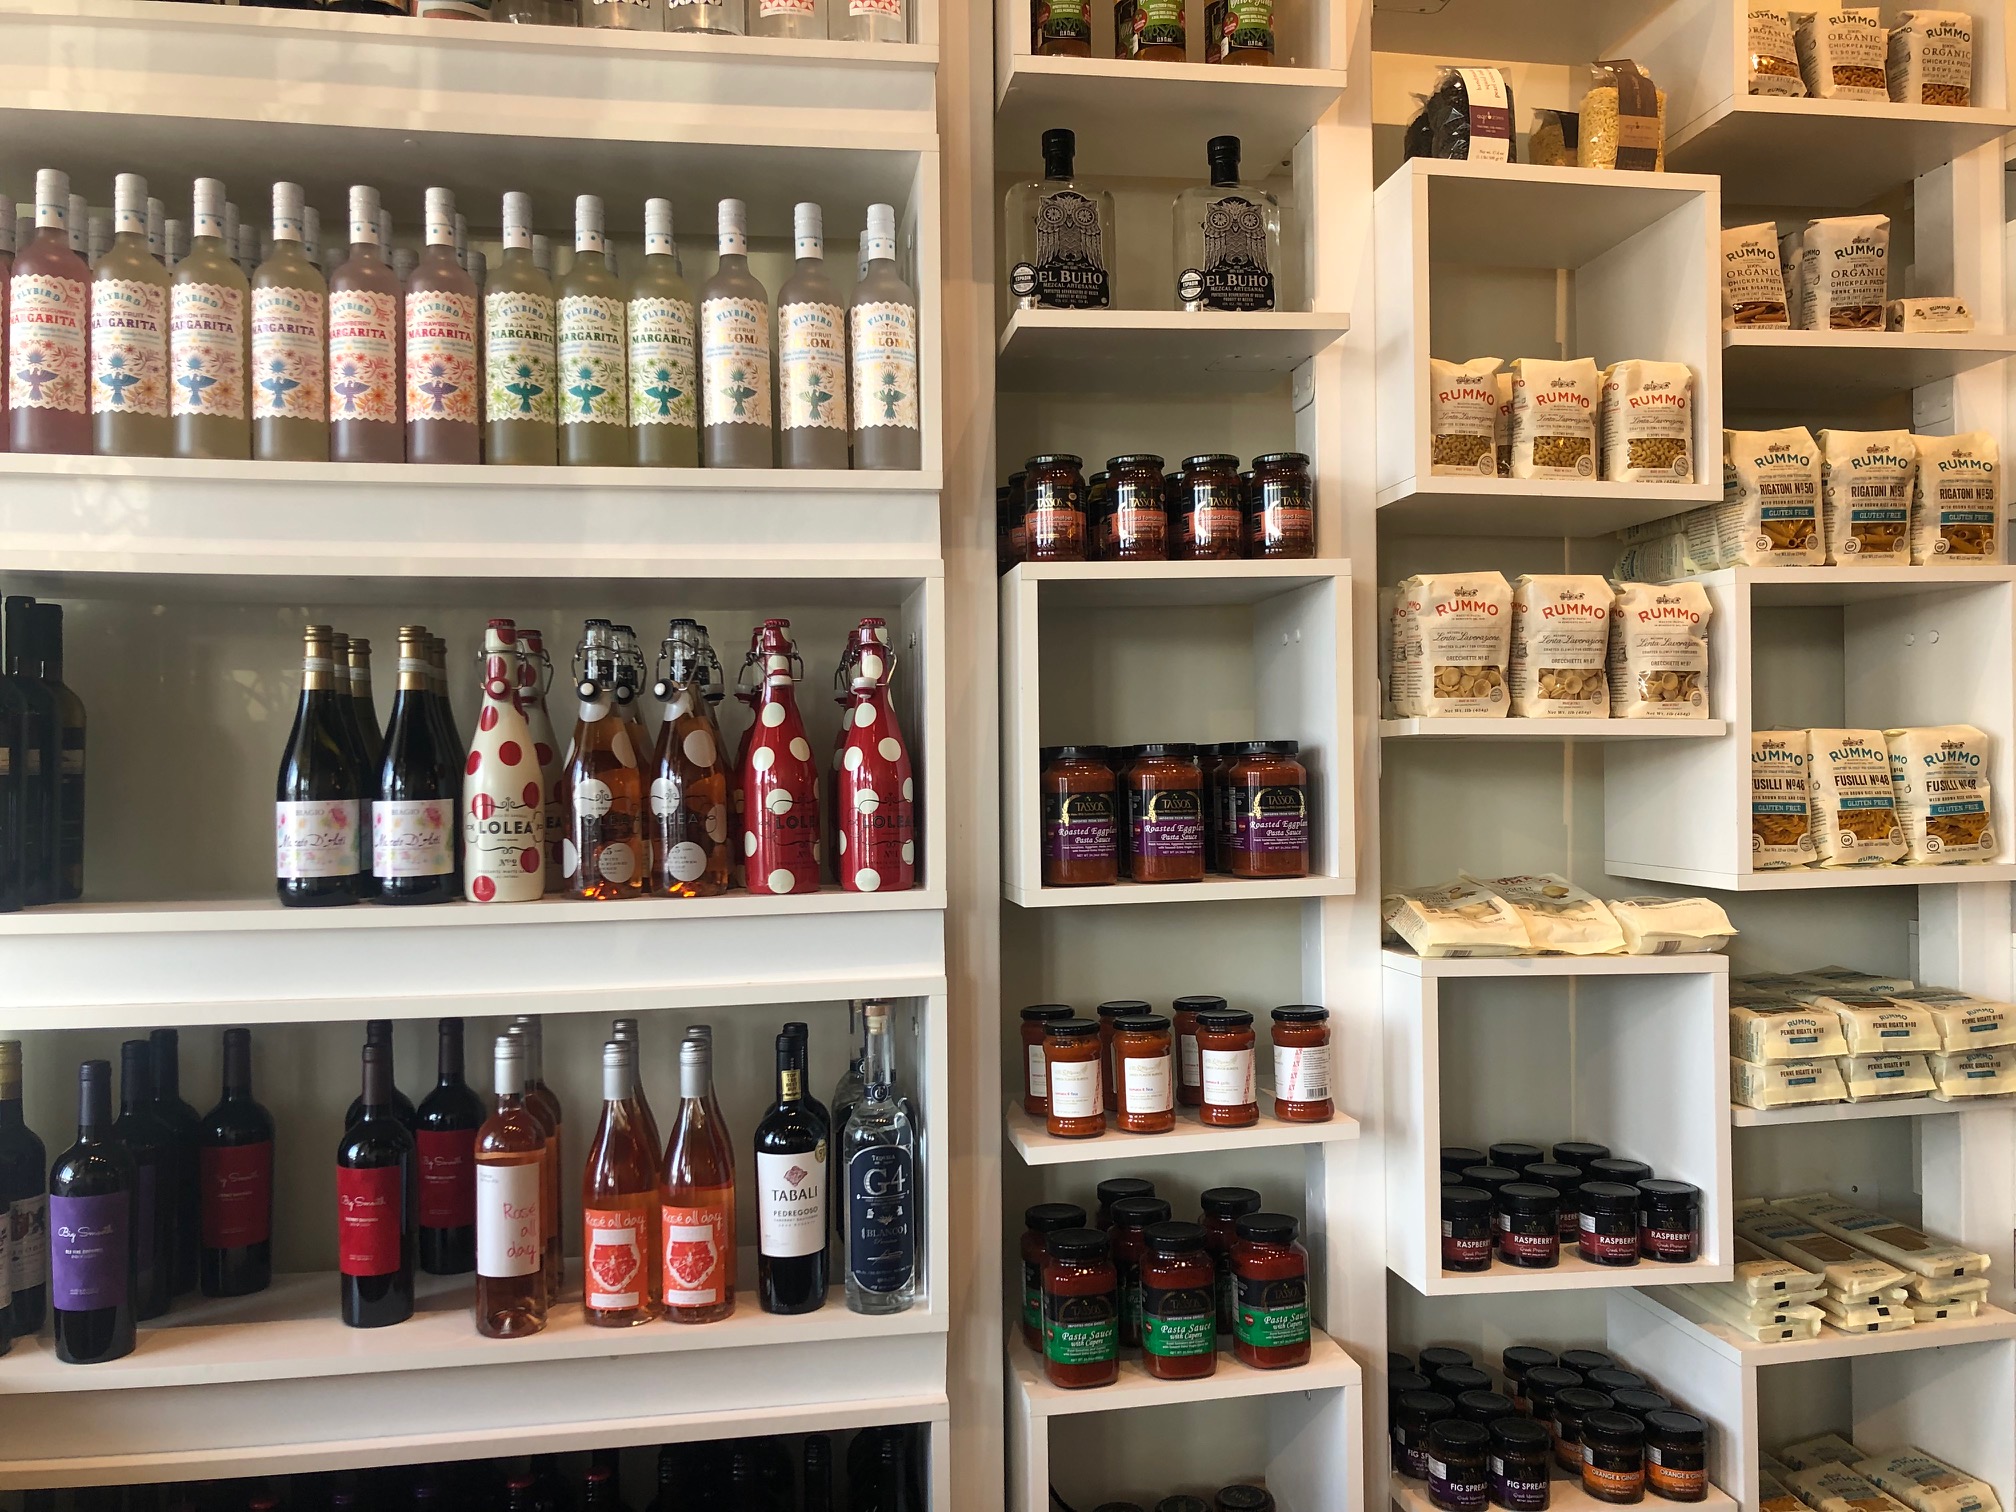 On white shelves, bottles of wine, bottles of sauce, and dry pasta in bags neatly line the shelves. Photo by Alyssa Buckley.